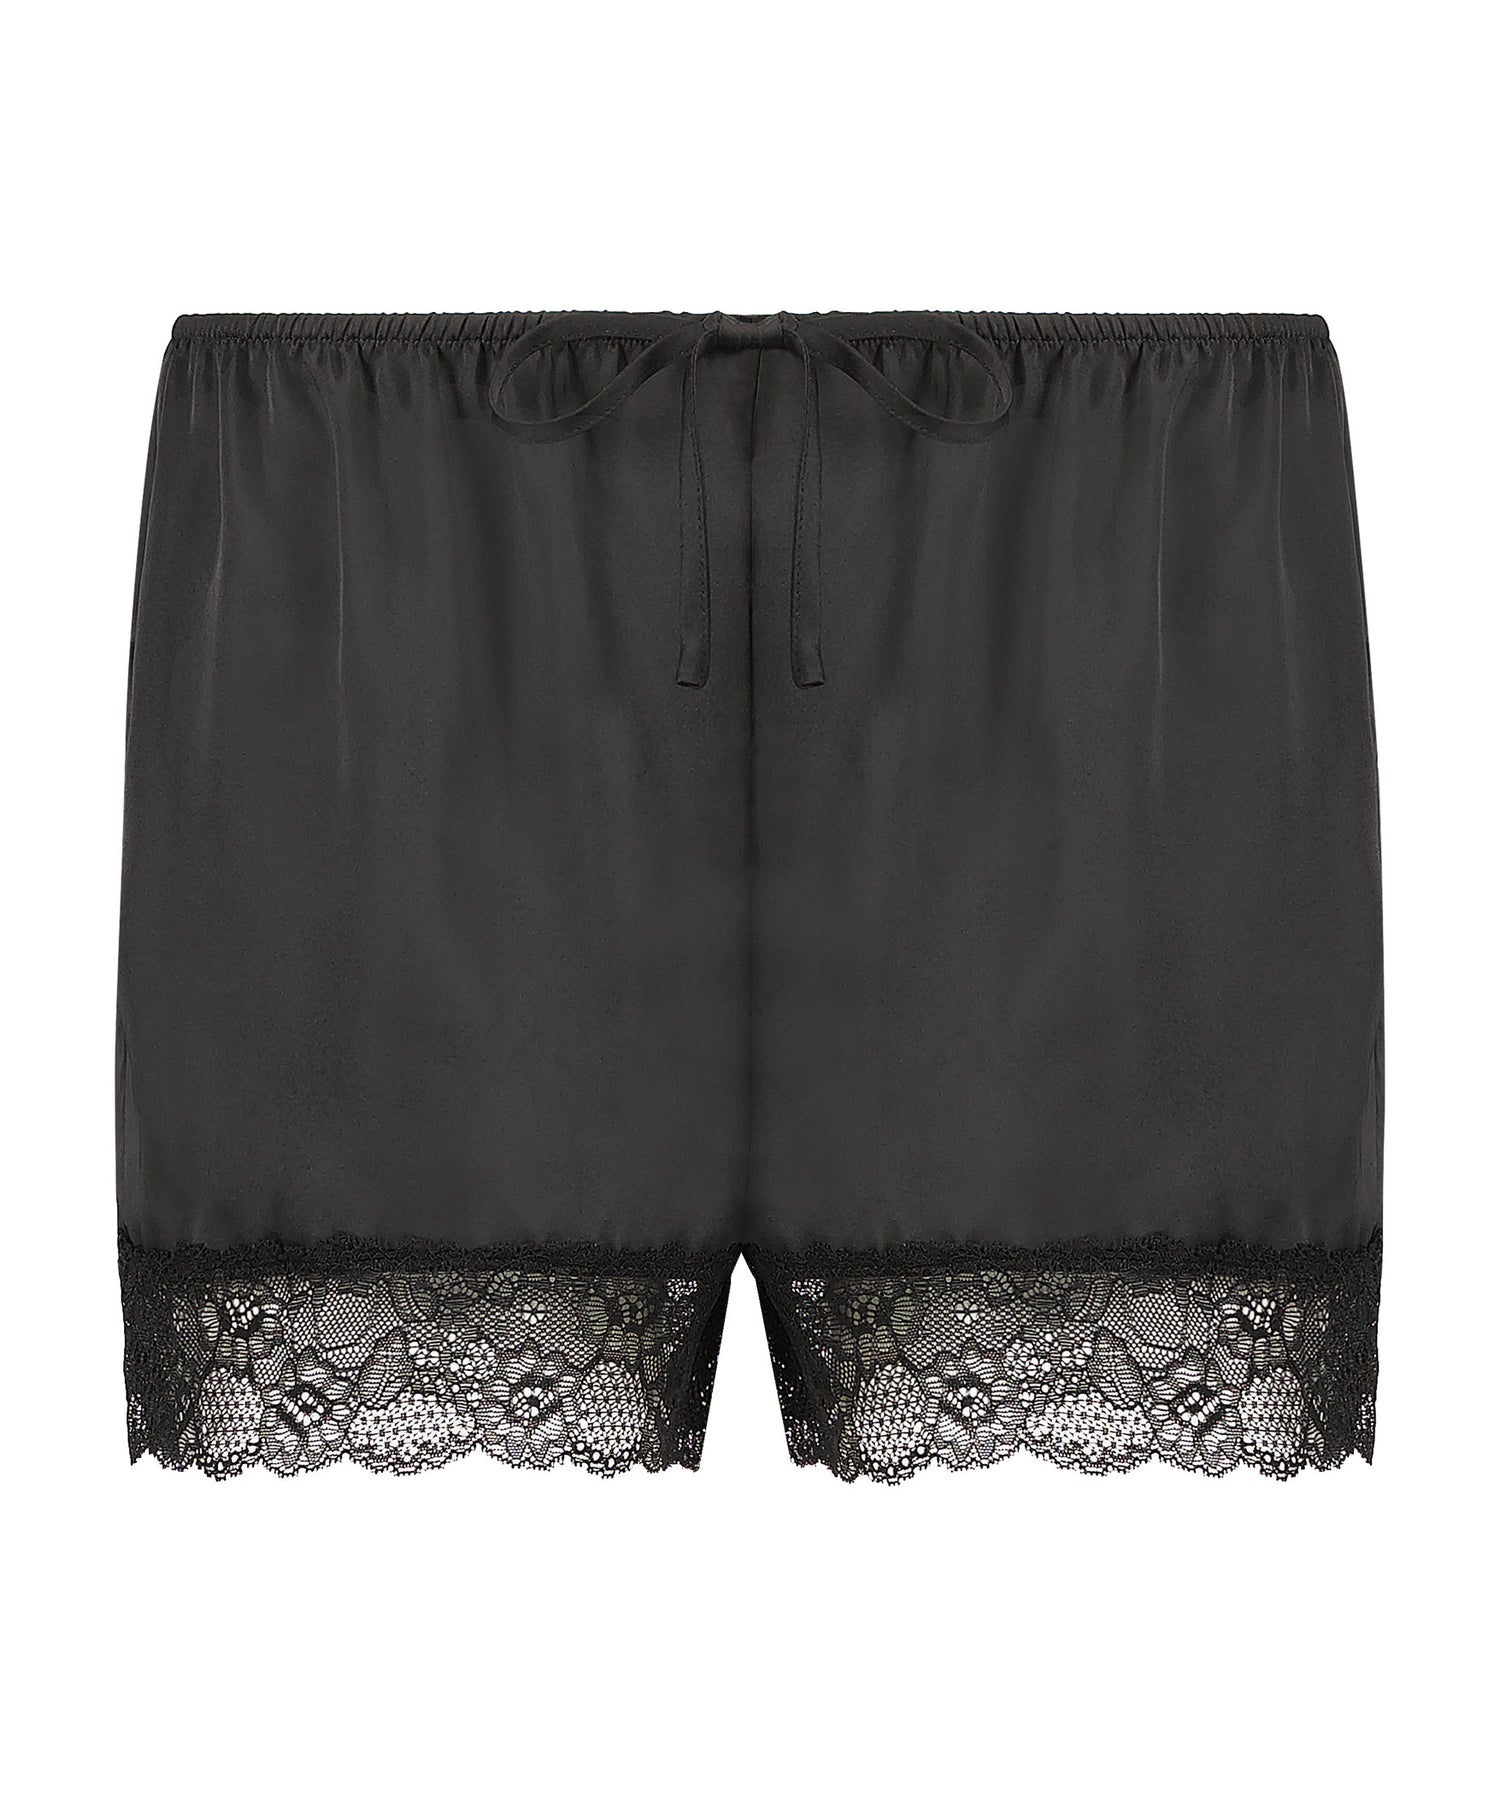 Meili Satin Shorts With Lace Trim_194796_Black_04